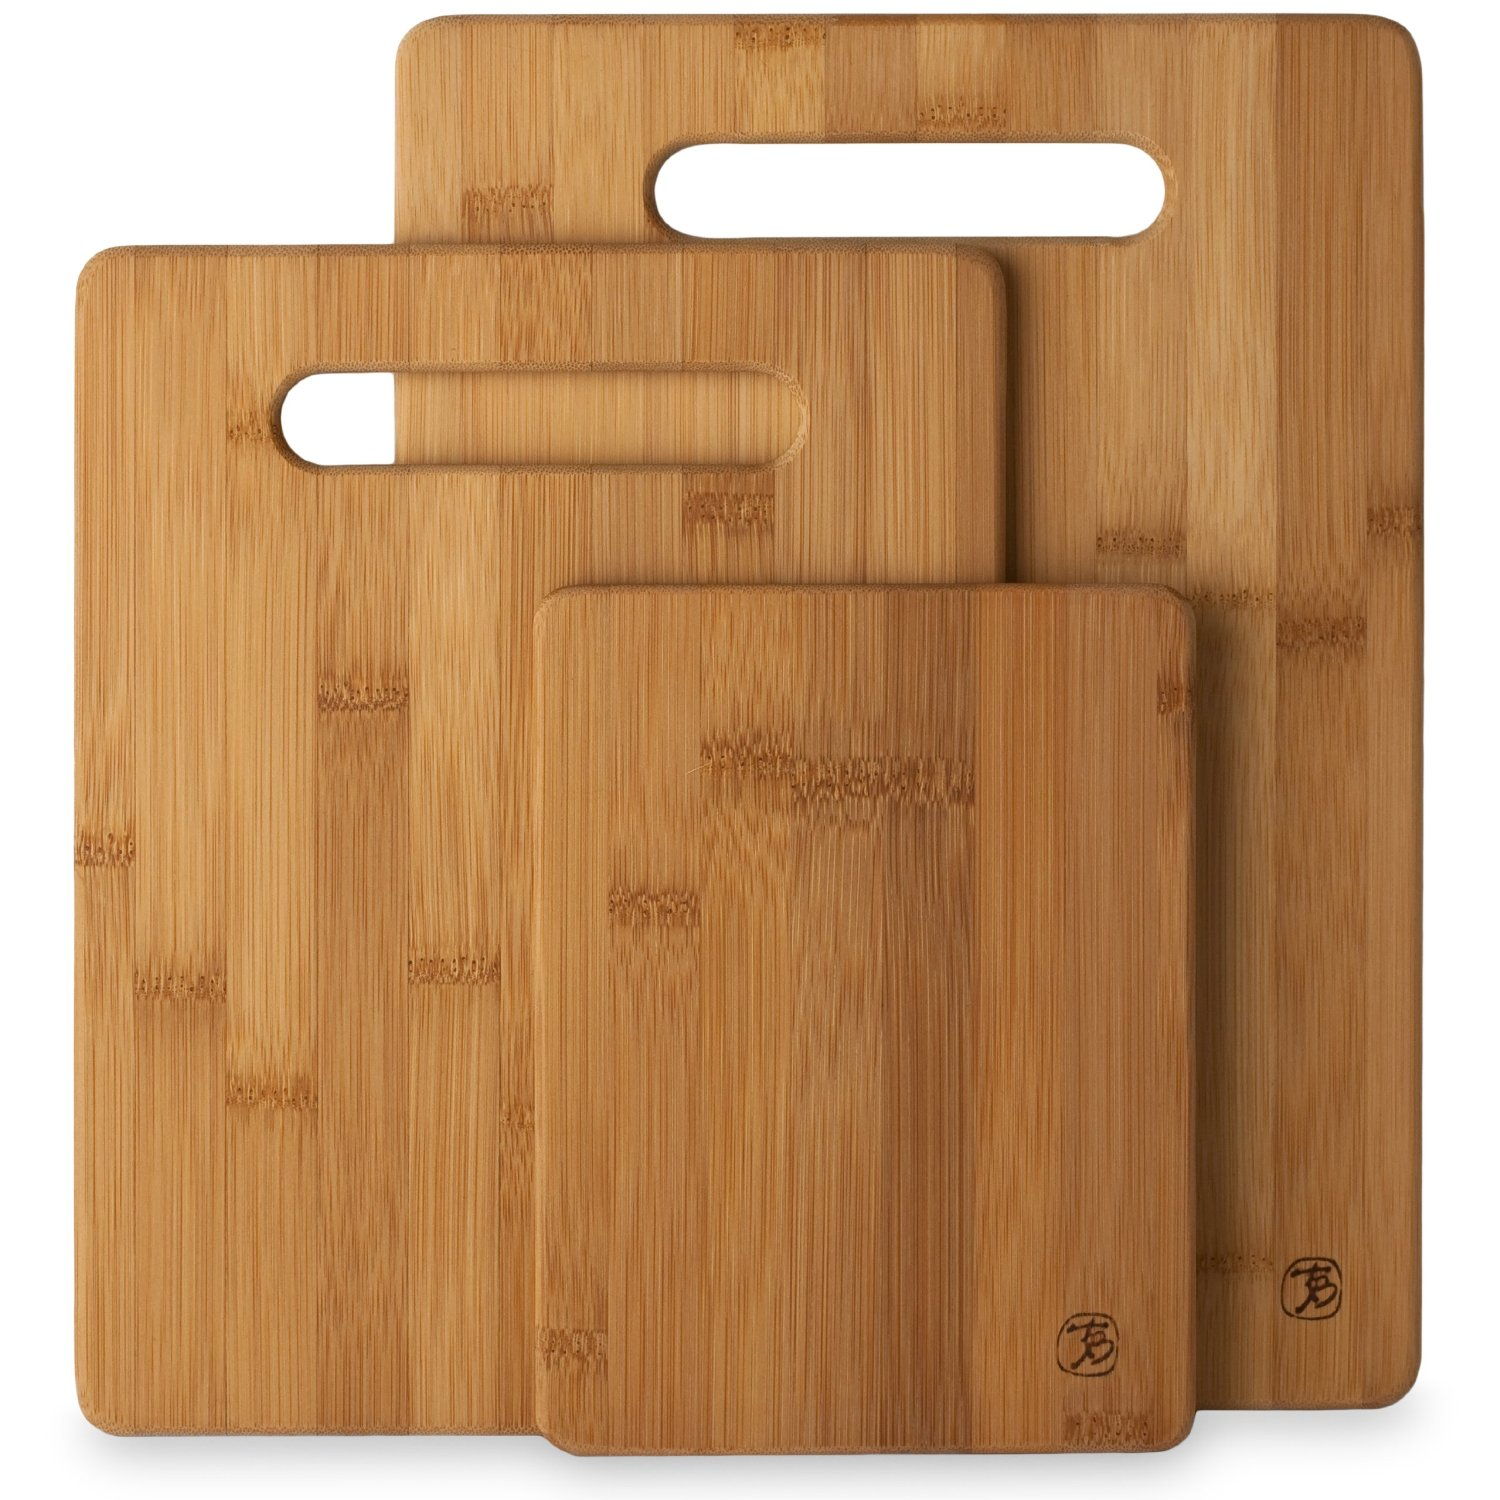 3 Piece Bamboo Cutting Board Set ONLY $12.99 on Amazon!